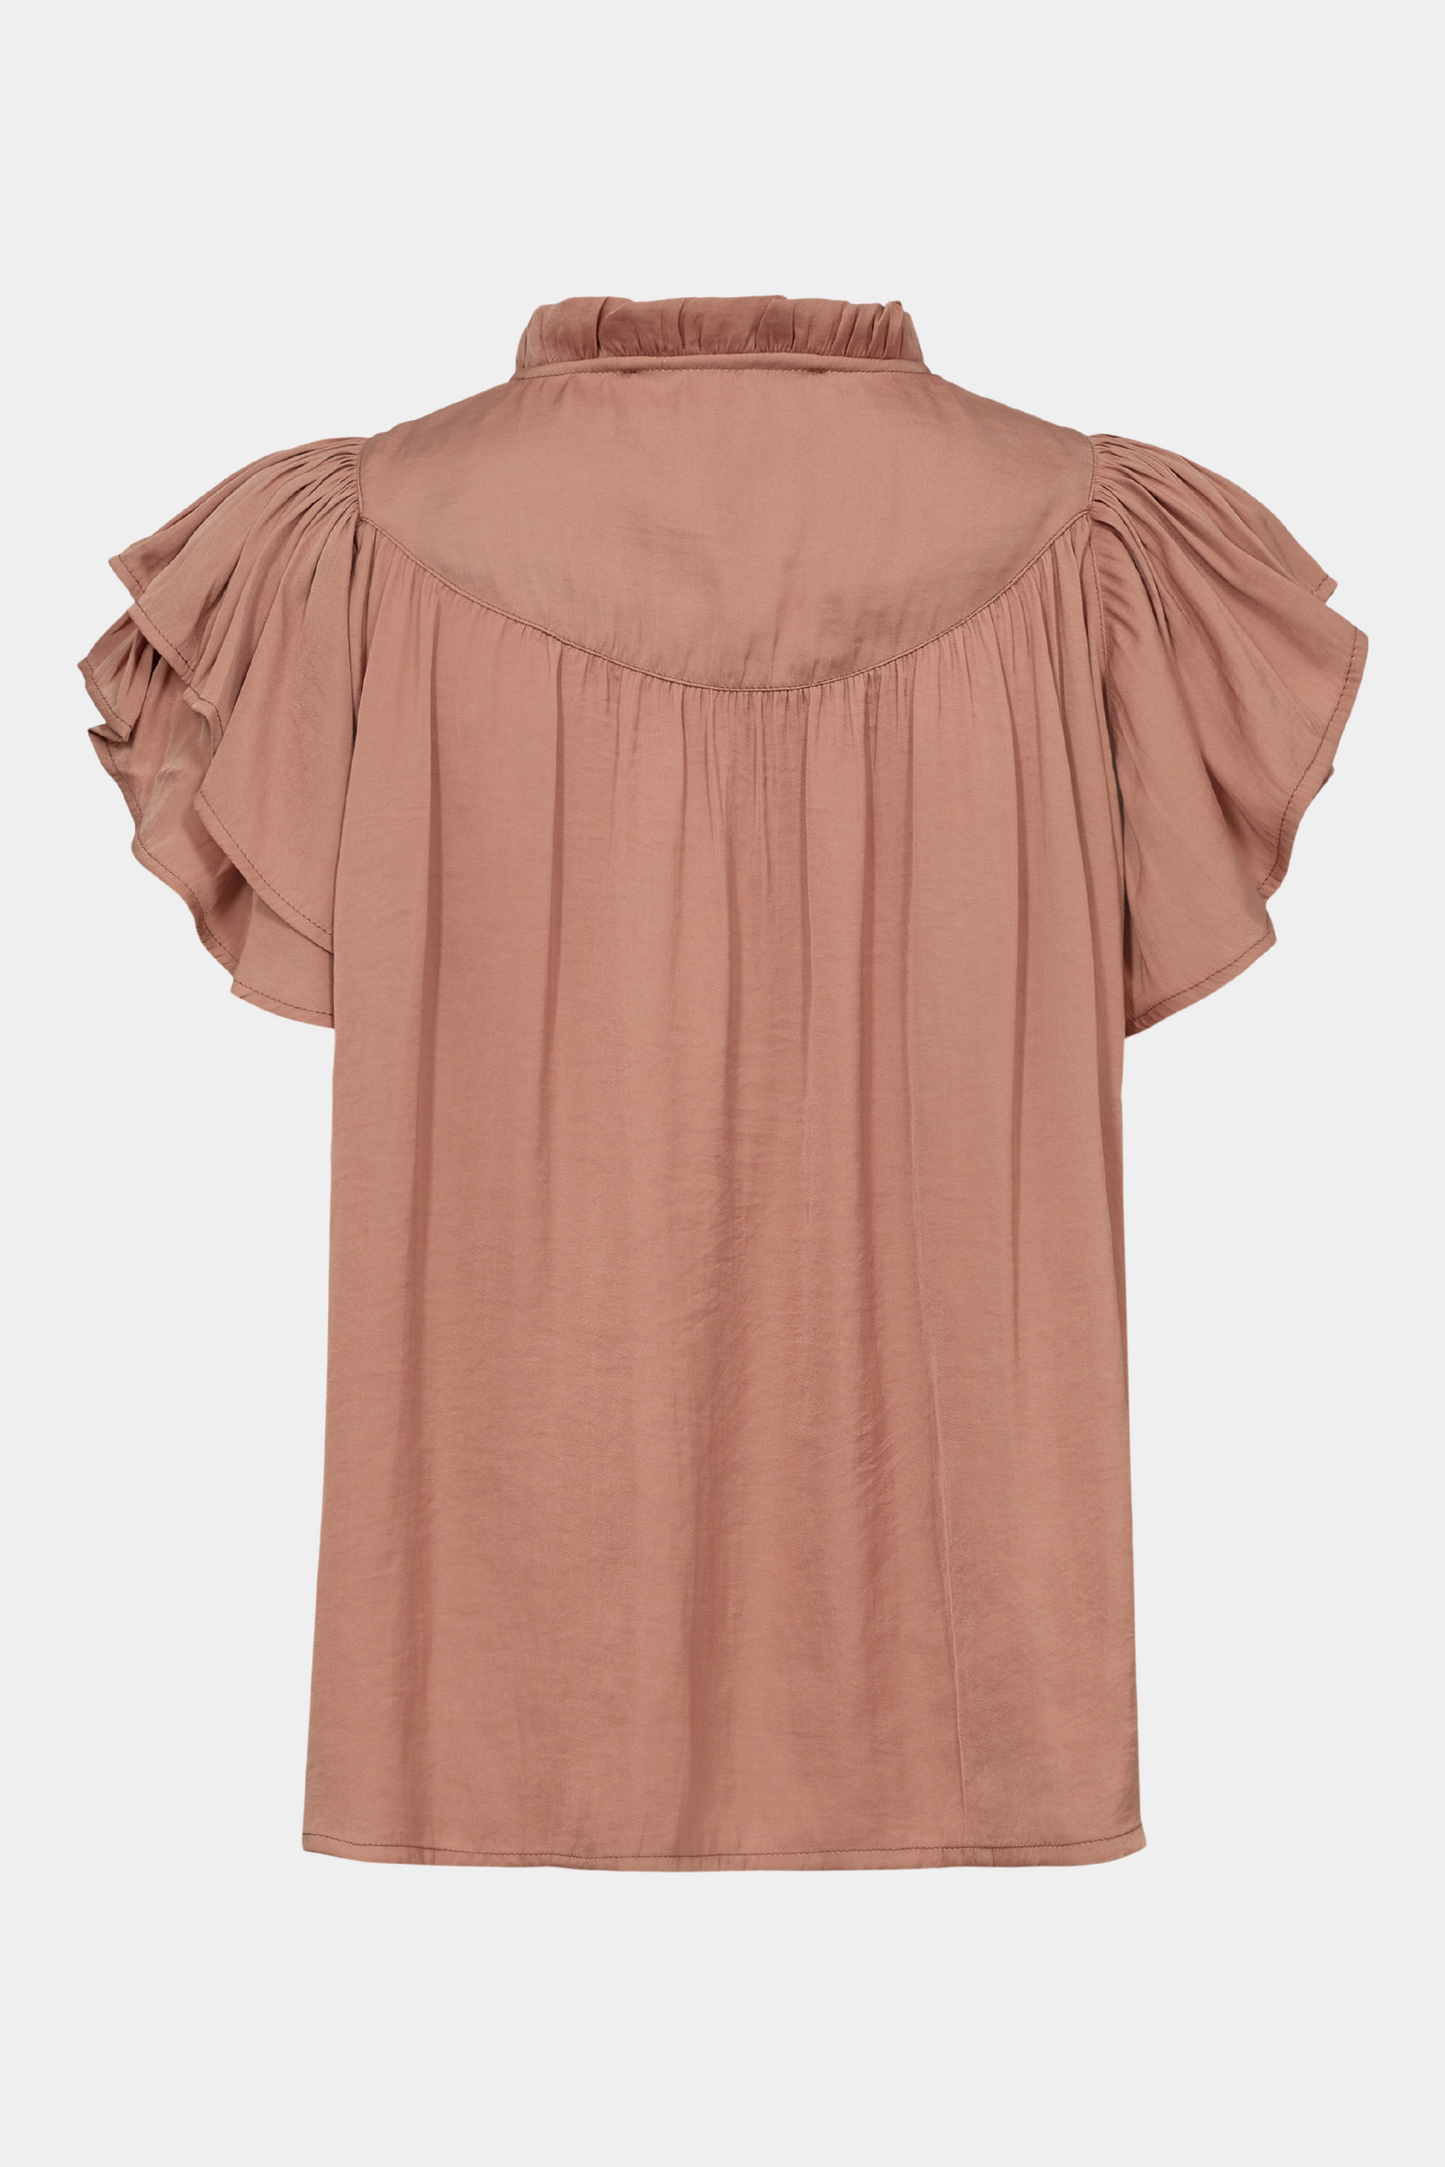 S242286 top, rosy brown